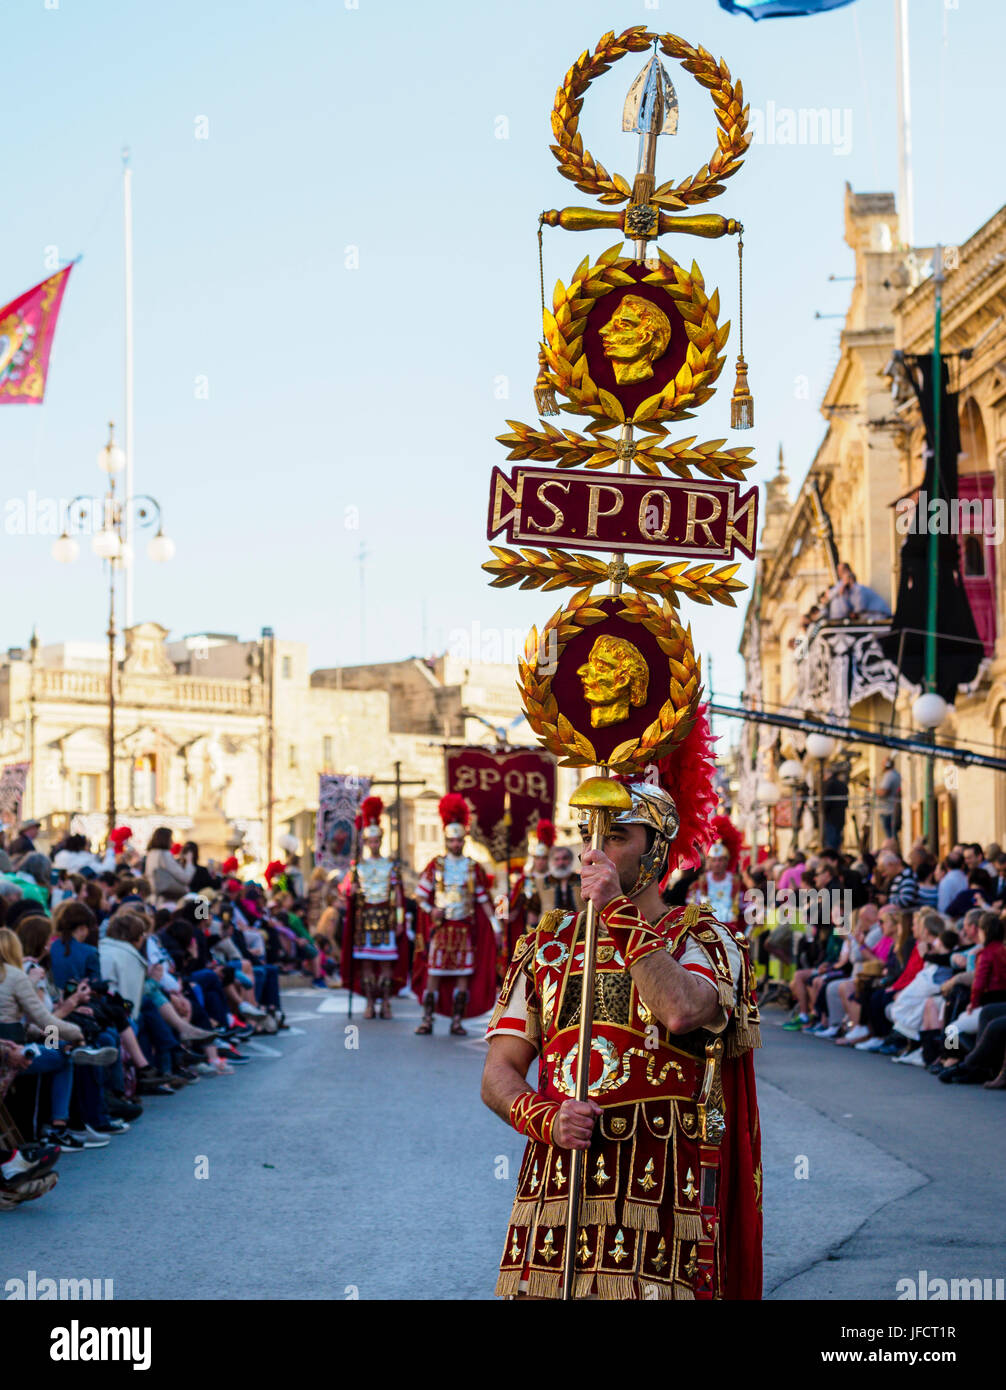 Inhabitants of Zejtun / Malta had their traditional Good Friday procession, some of them dressed like Roman legionaries with SPQR / S.P.Q.R. sign Stock Photo